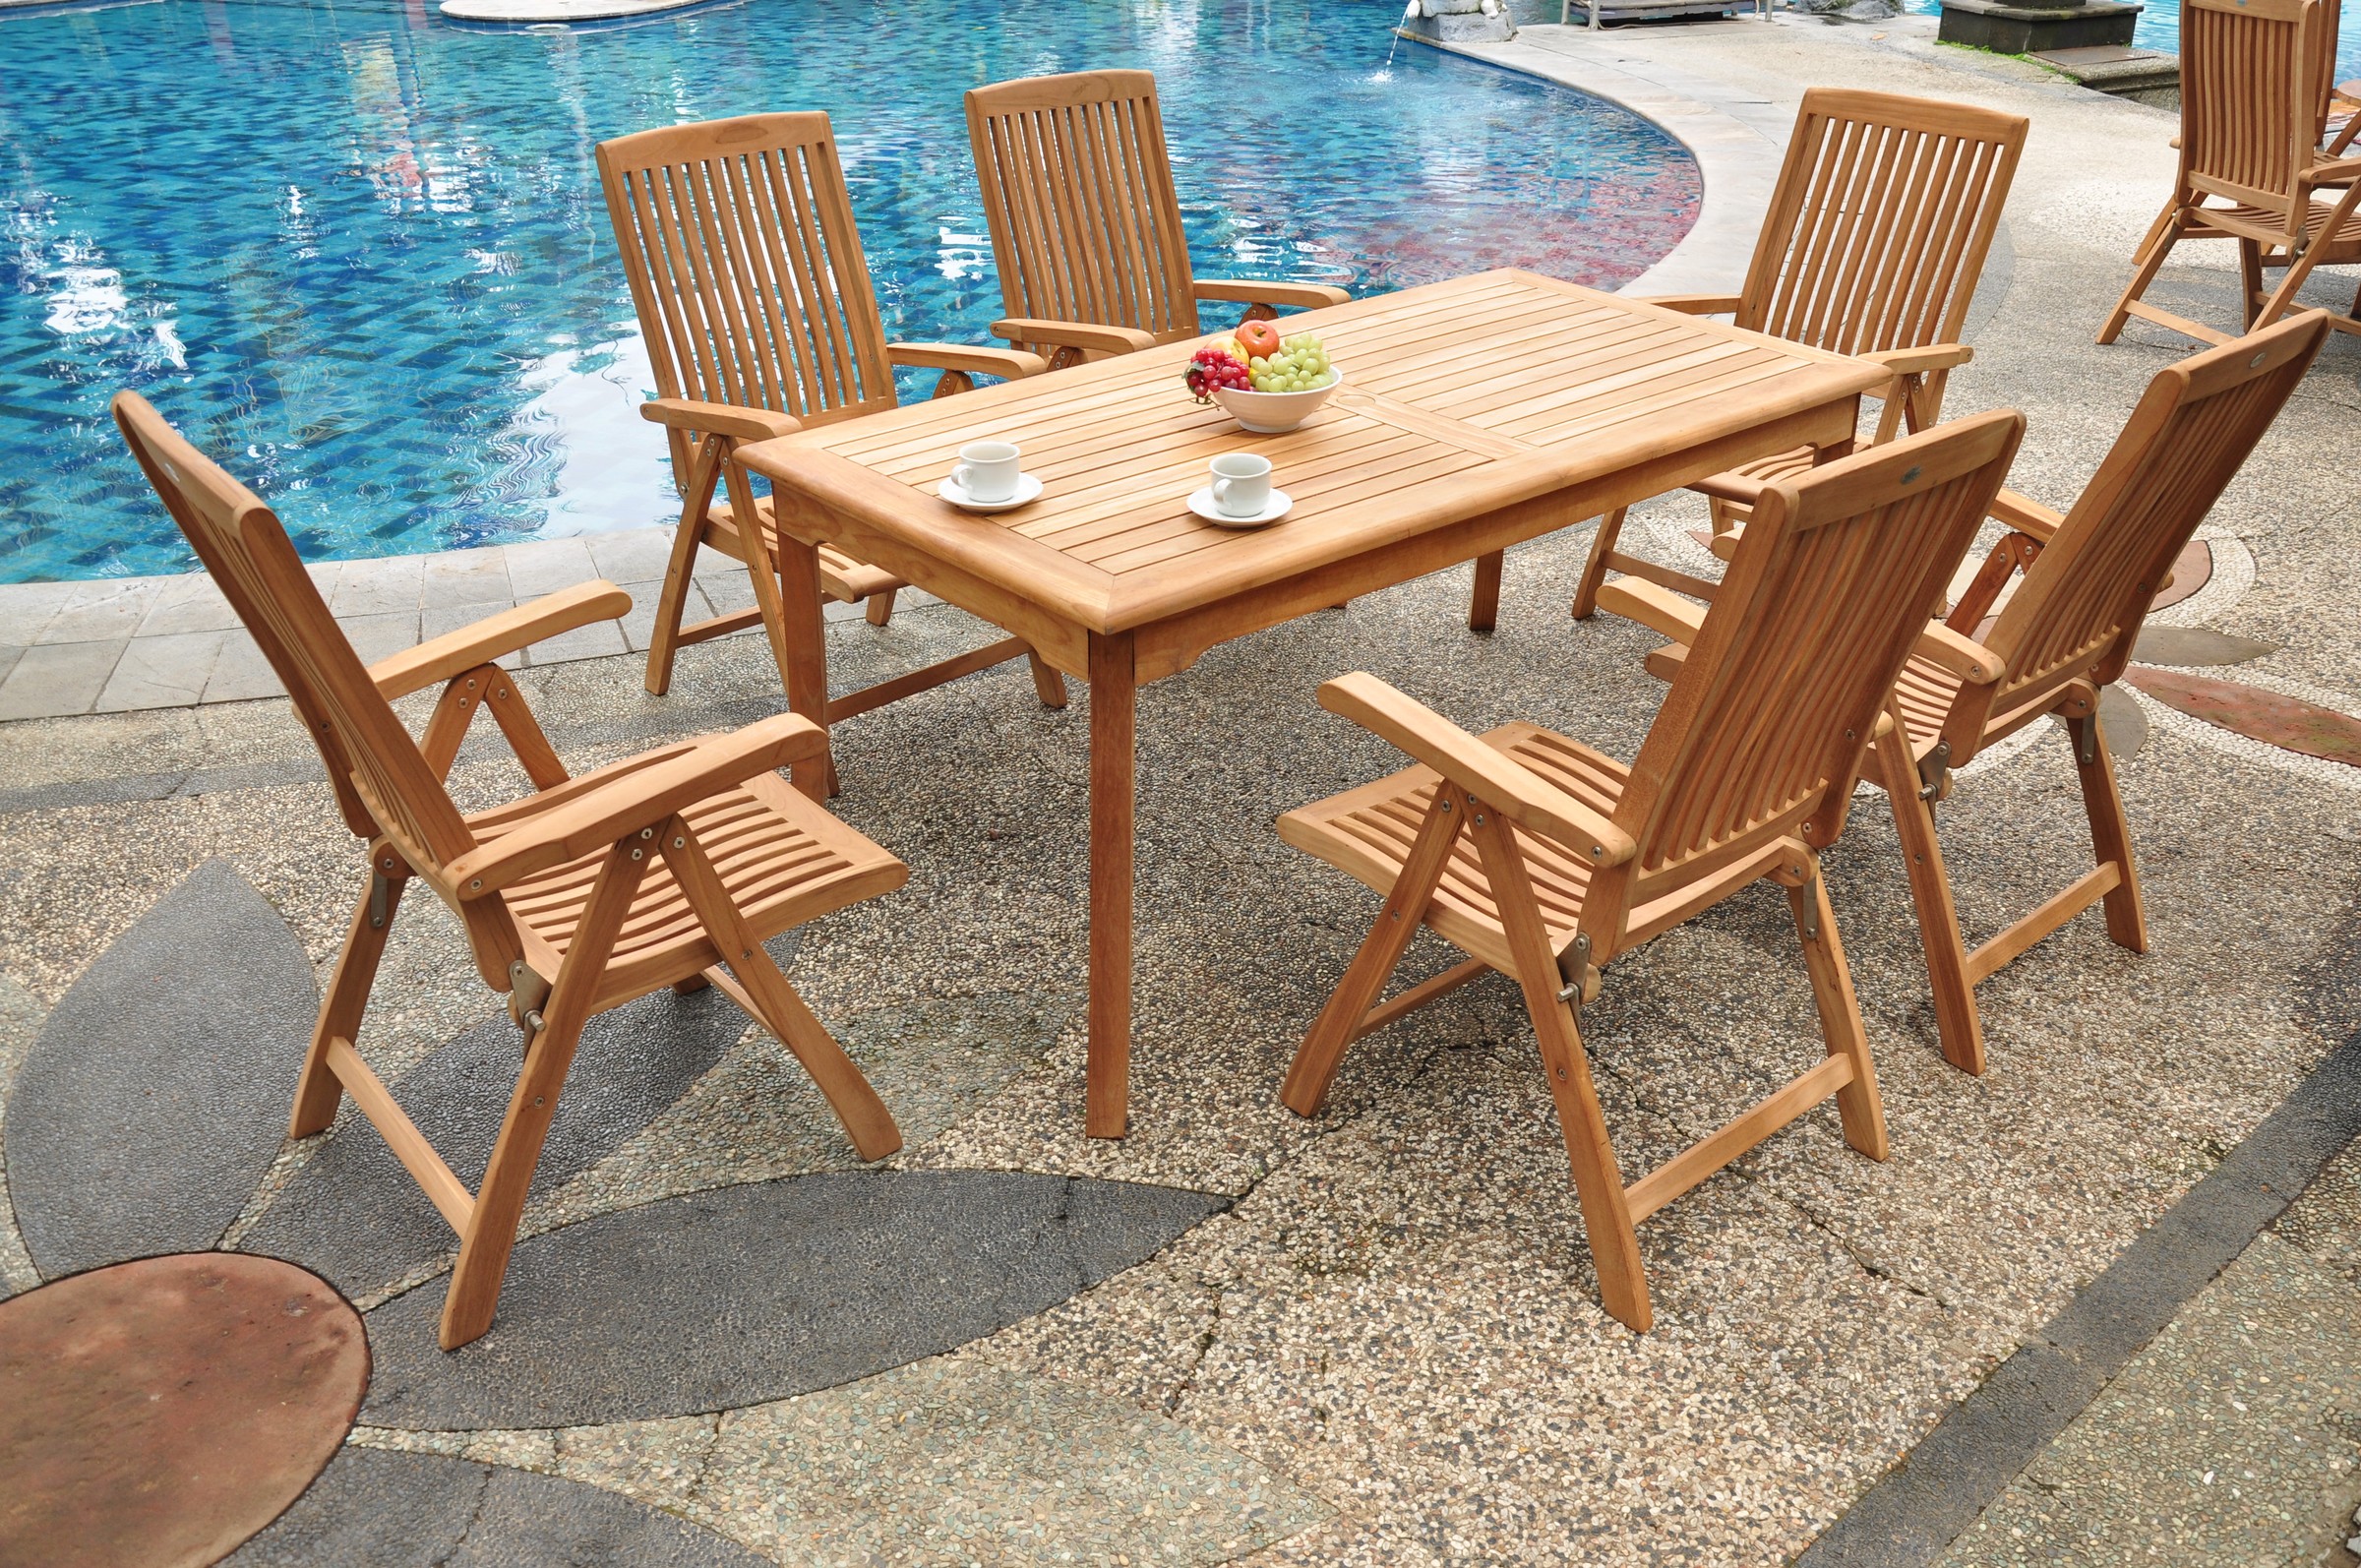 Teak Dining Set:8 Seater 9 Pc - 71" Rectangle Table And 8 Marley Reclining Arm Chairs Outdoor Patio Grade-A Teak Wood WholesaleTeak #WMDSMRa - image 4 of 4